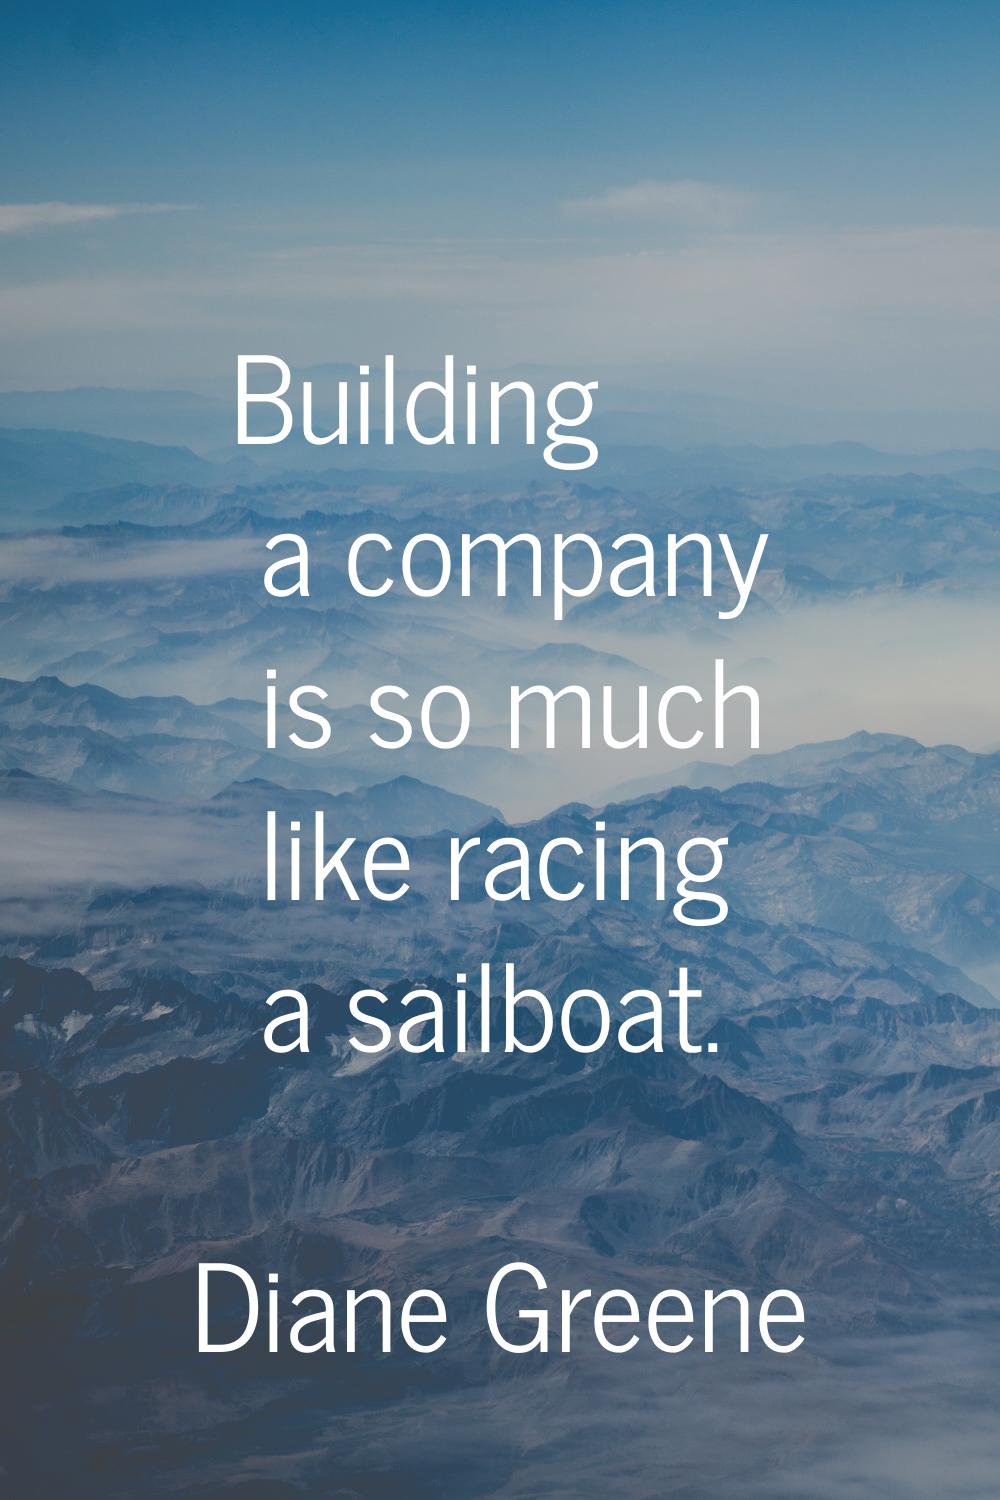 Building a company is so much like racing a sailboat.